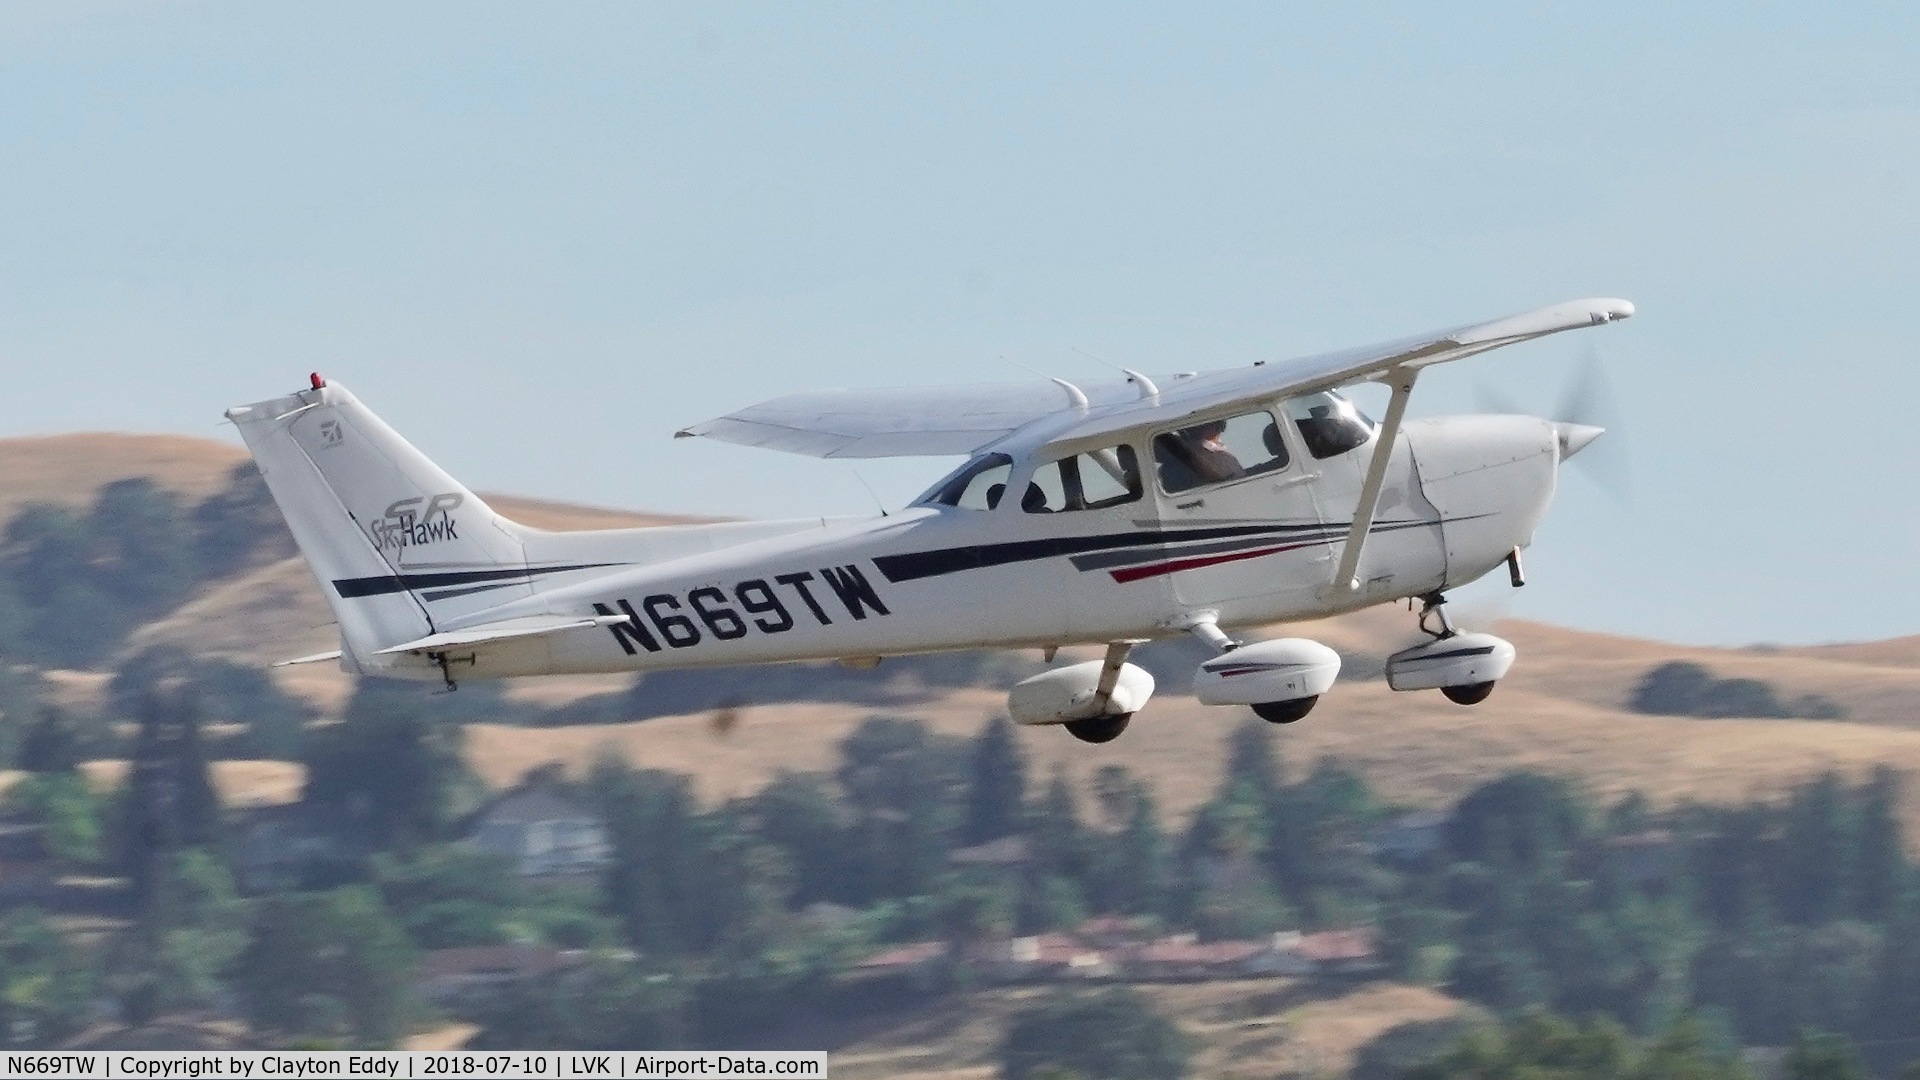 N669TW, 2002 Cessna 172S C/N 172S9066, Livermore Airport California 2018.